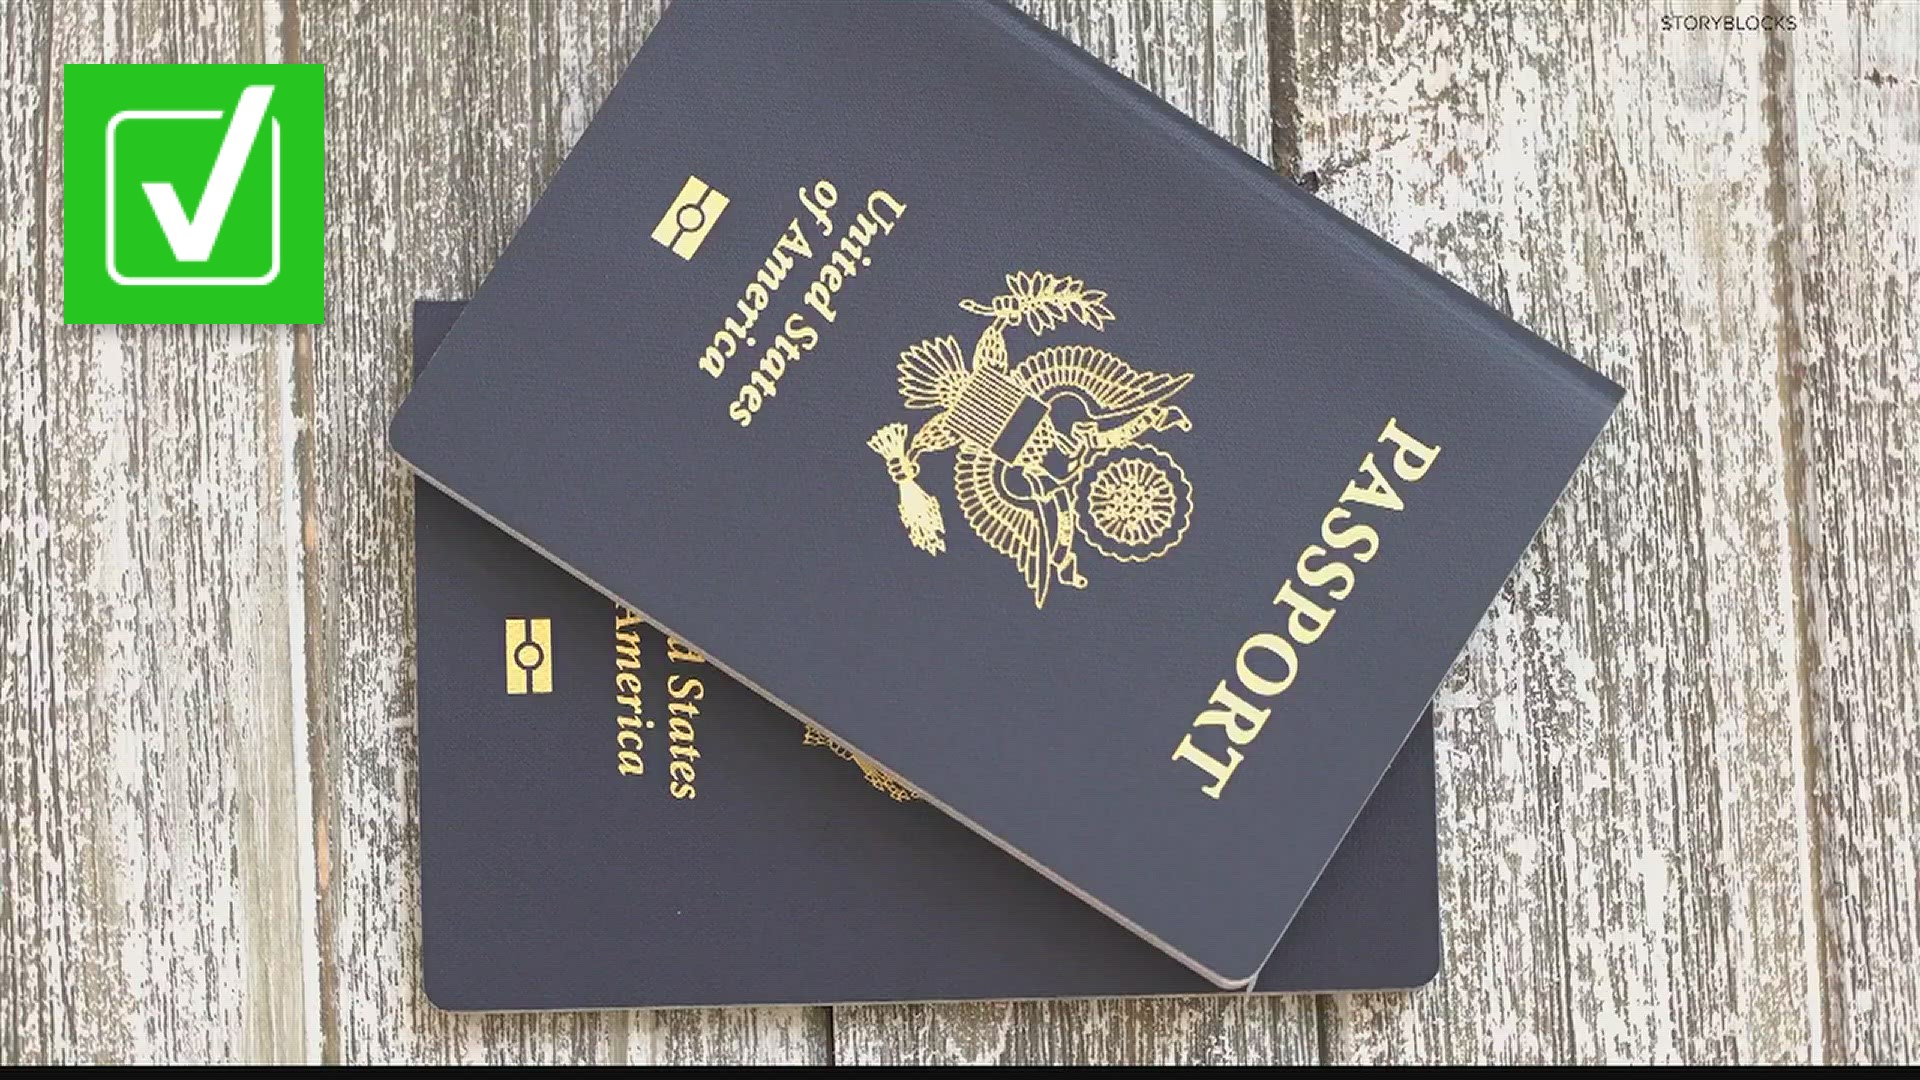 Summer travel season means some families want to drop everything and go on an international romp - but can they get passports in time?